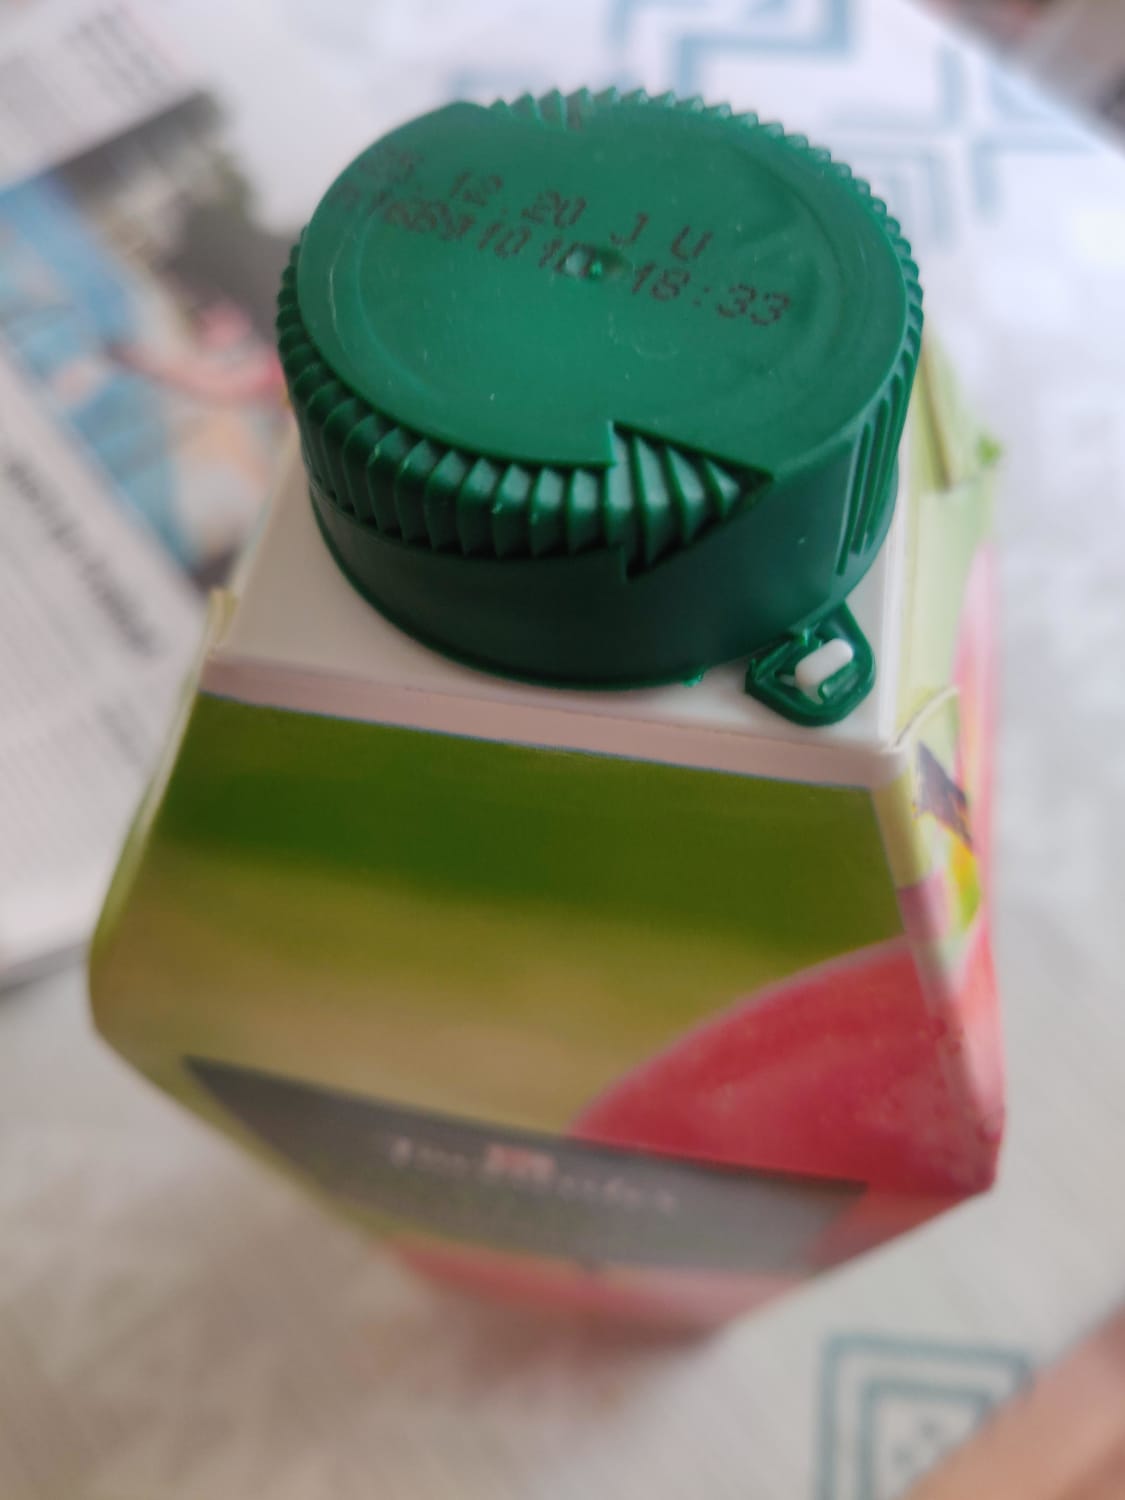 The cap of this apple juice bottle has an engraved arrow, which indicates the direction of rotation to open it.